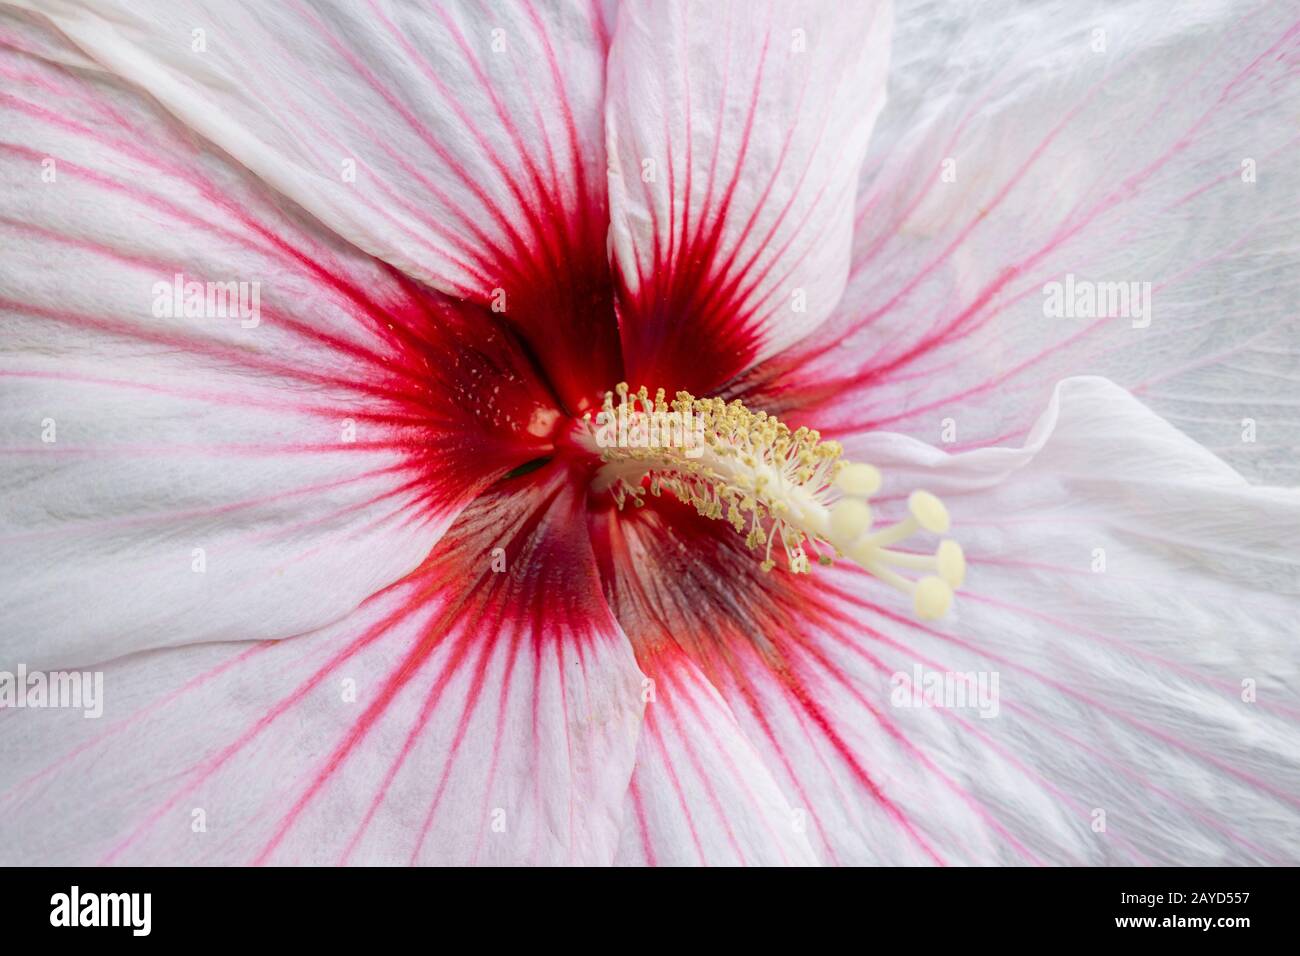 Hibiscus Luna White Brilliant White Petals and a Red Eye and long yellow pollen stem stigma Stock Photo